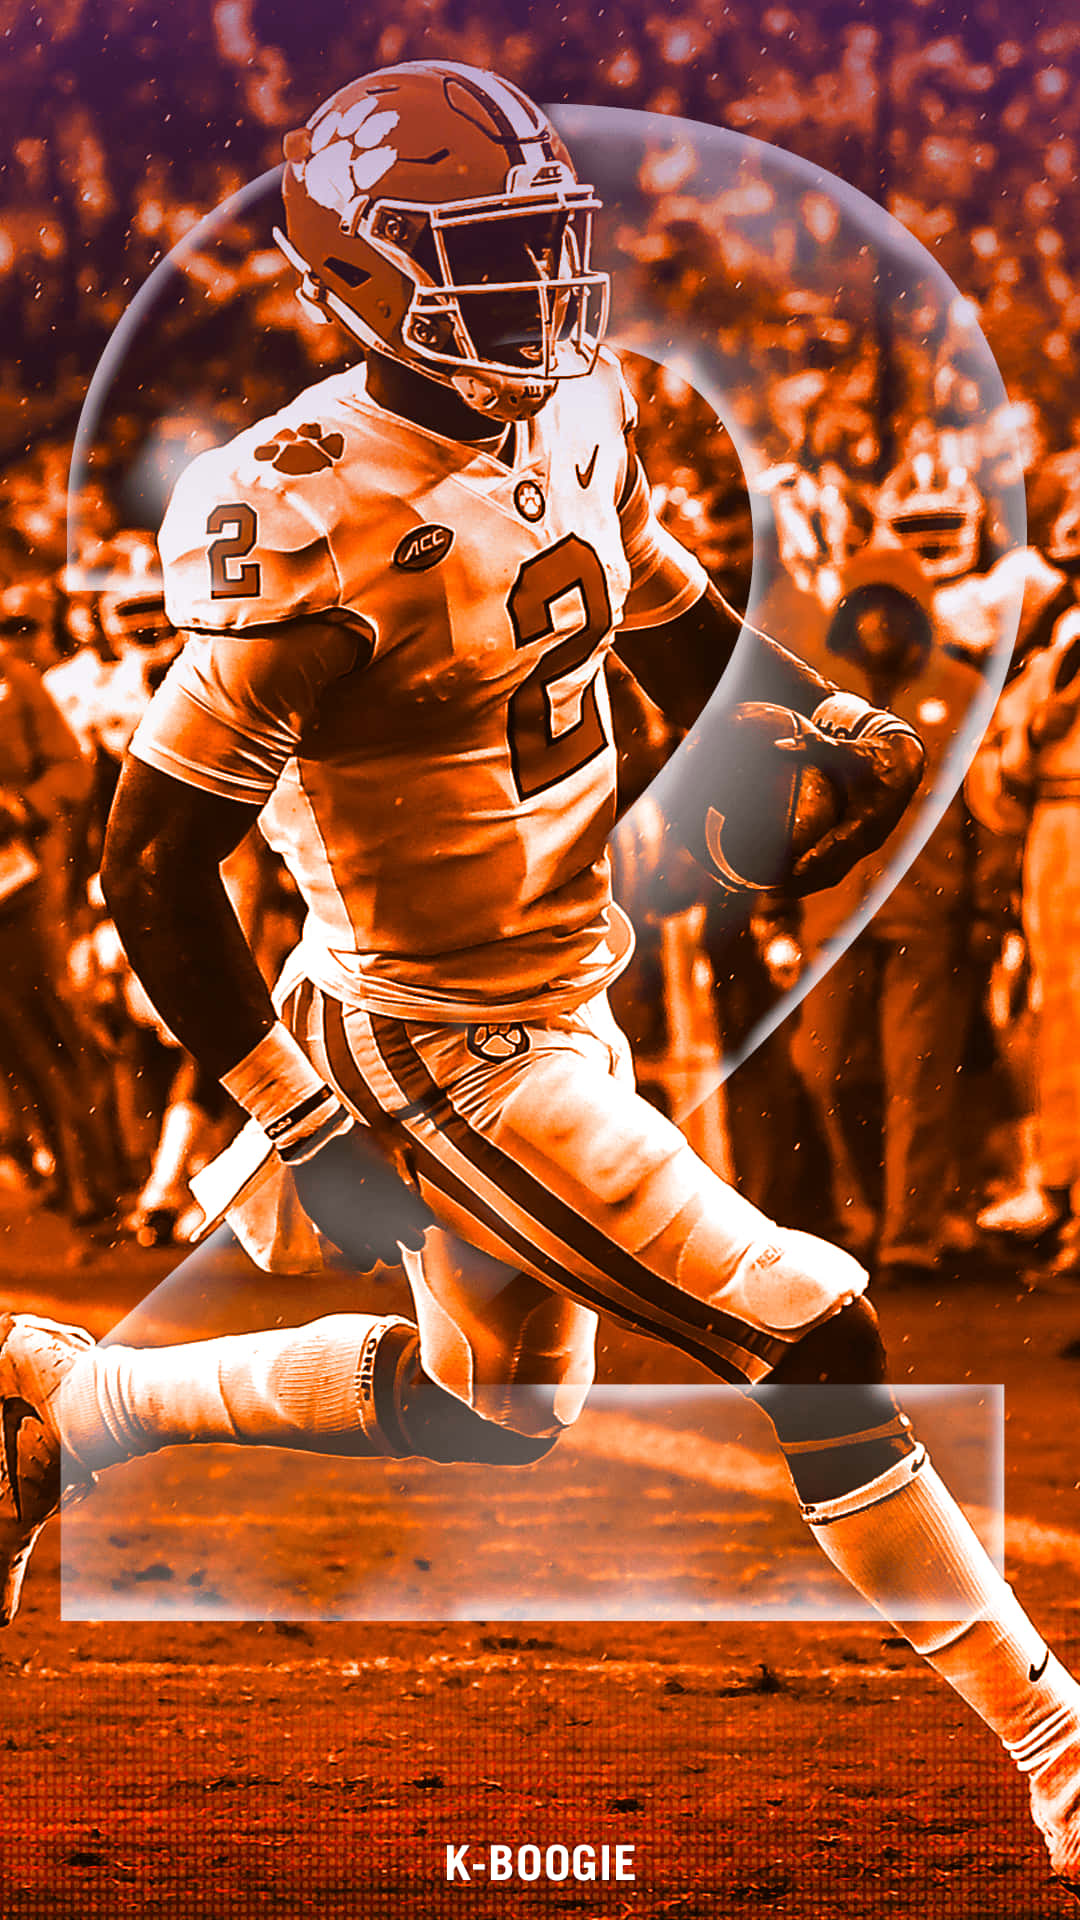 Don't miss a beat with Clemson on your iPhone! Wallpaper